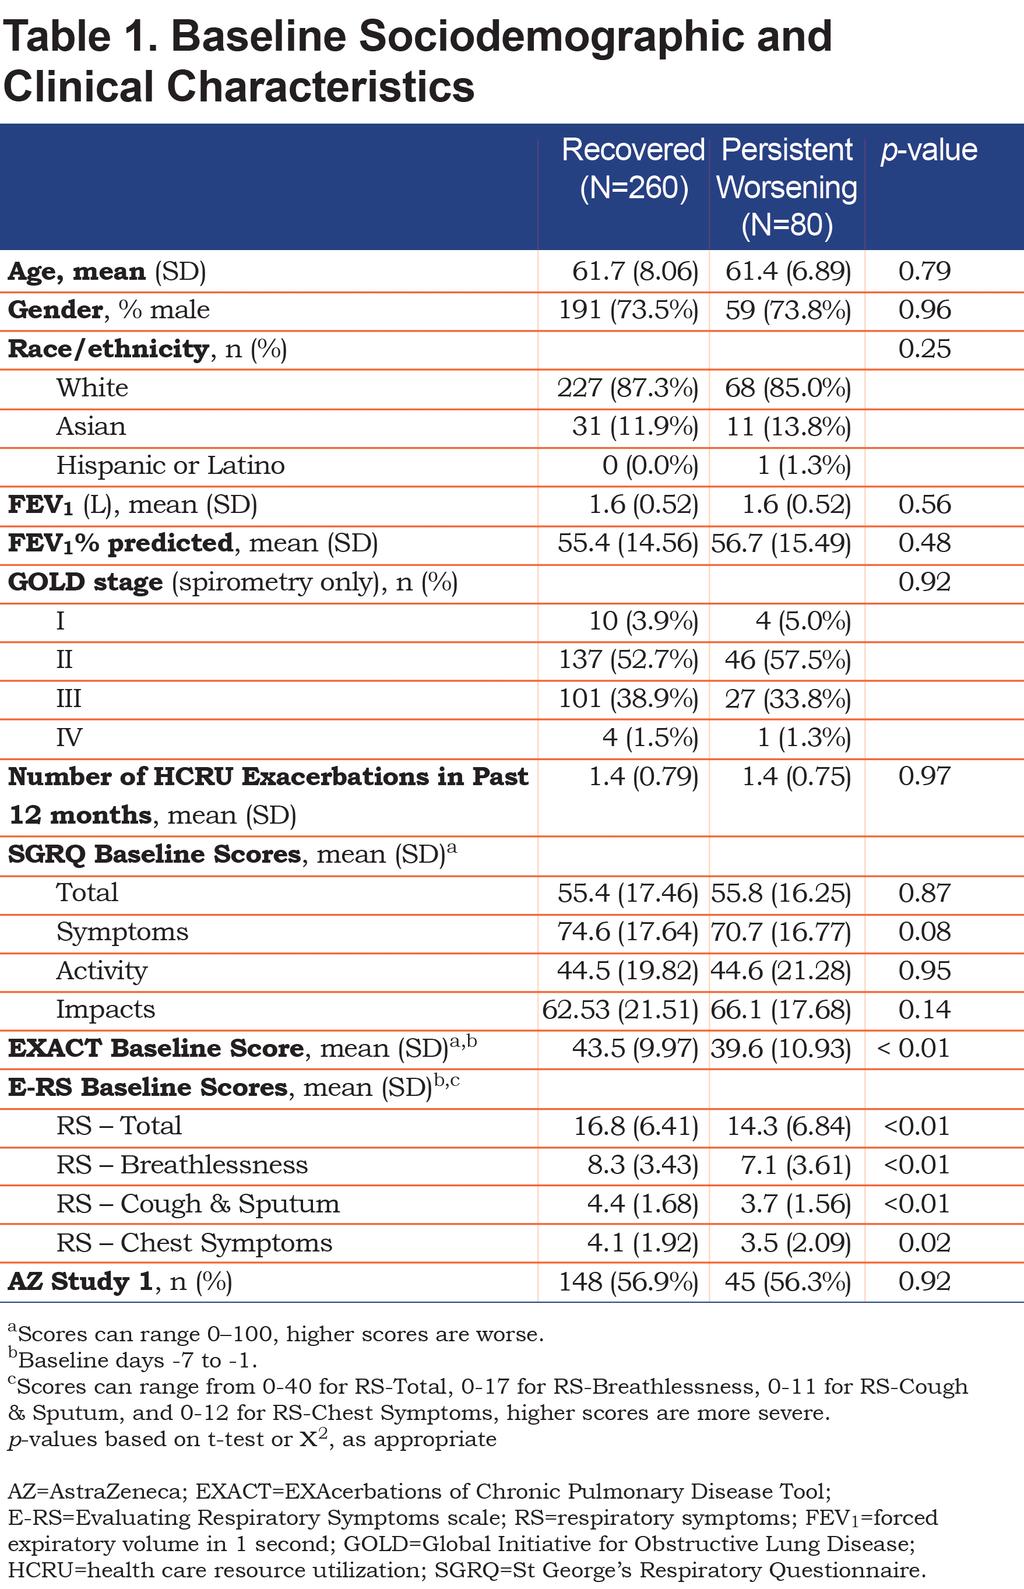 31 Symptom-defined Exacerbation Recovery Impact (-0.04±0.29) (p=0.89) (see online supplement).